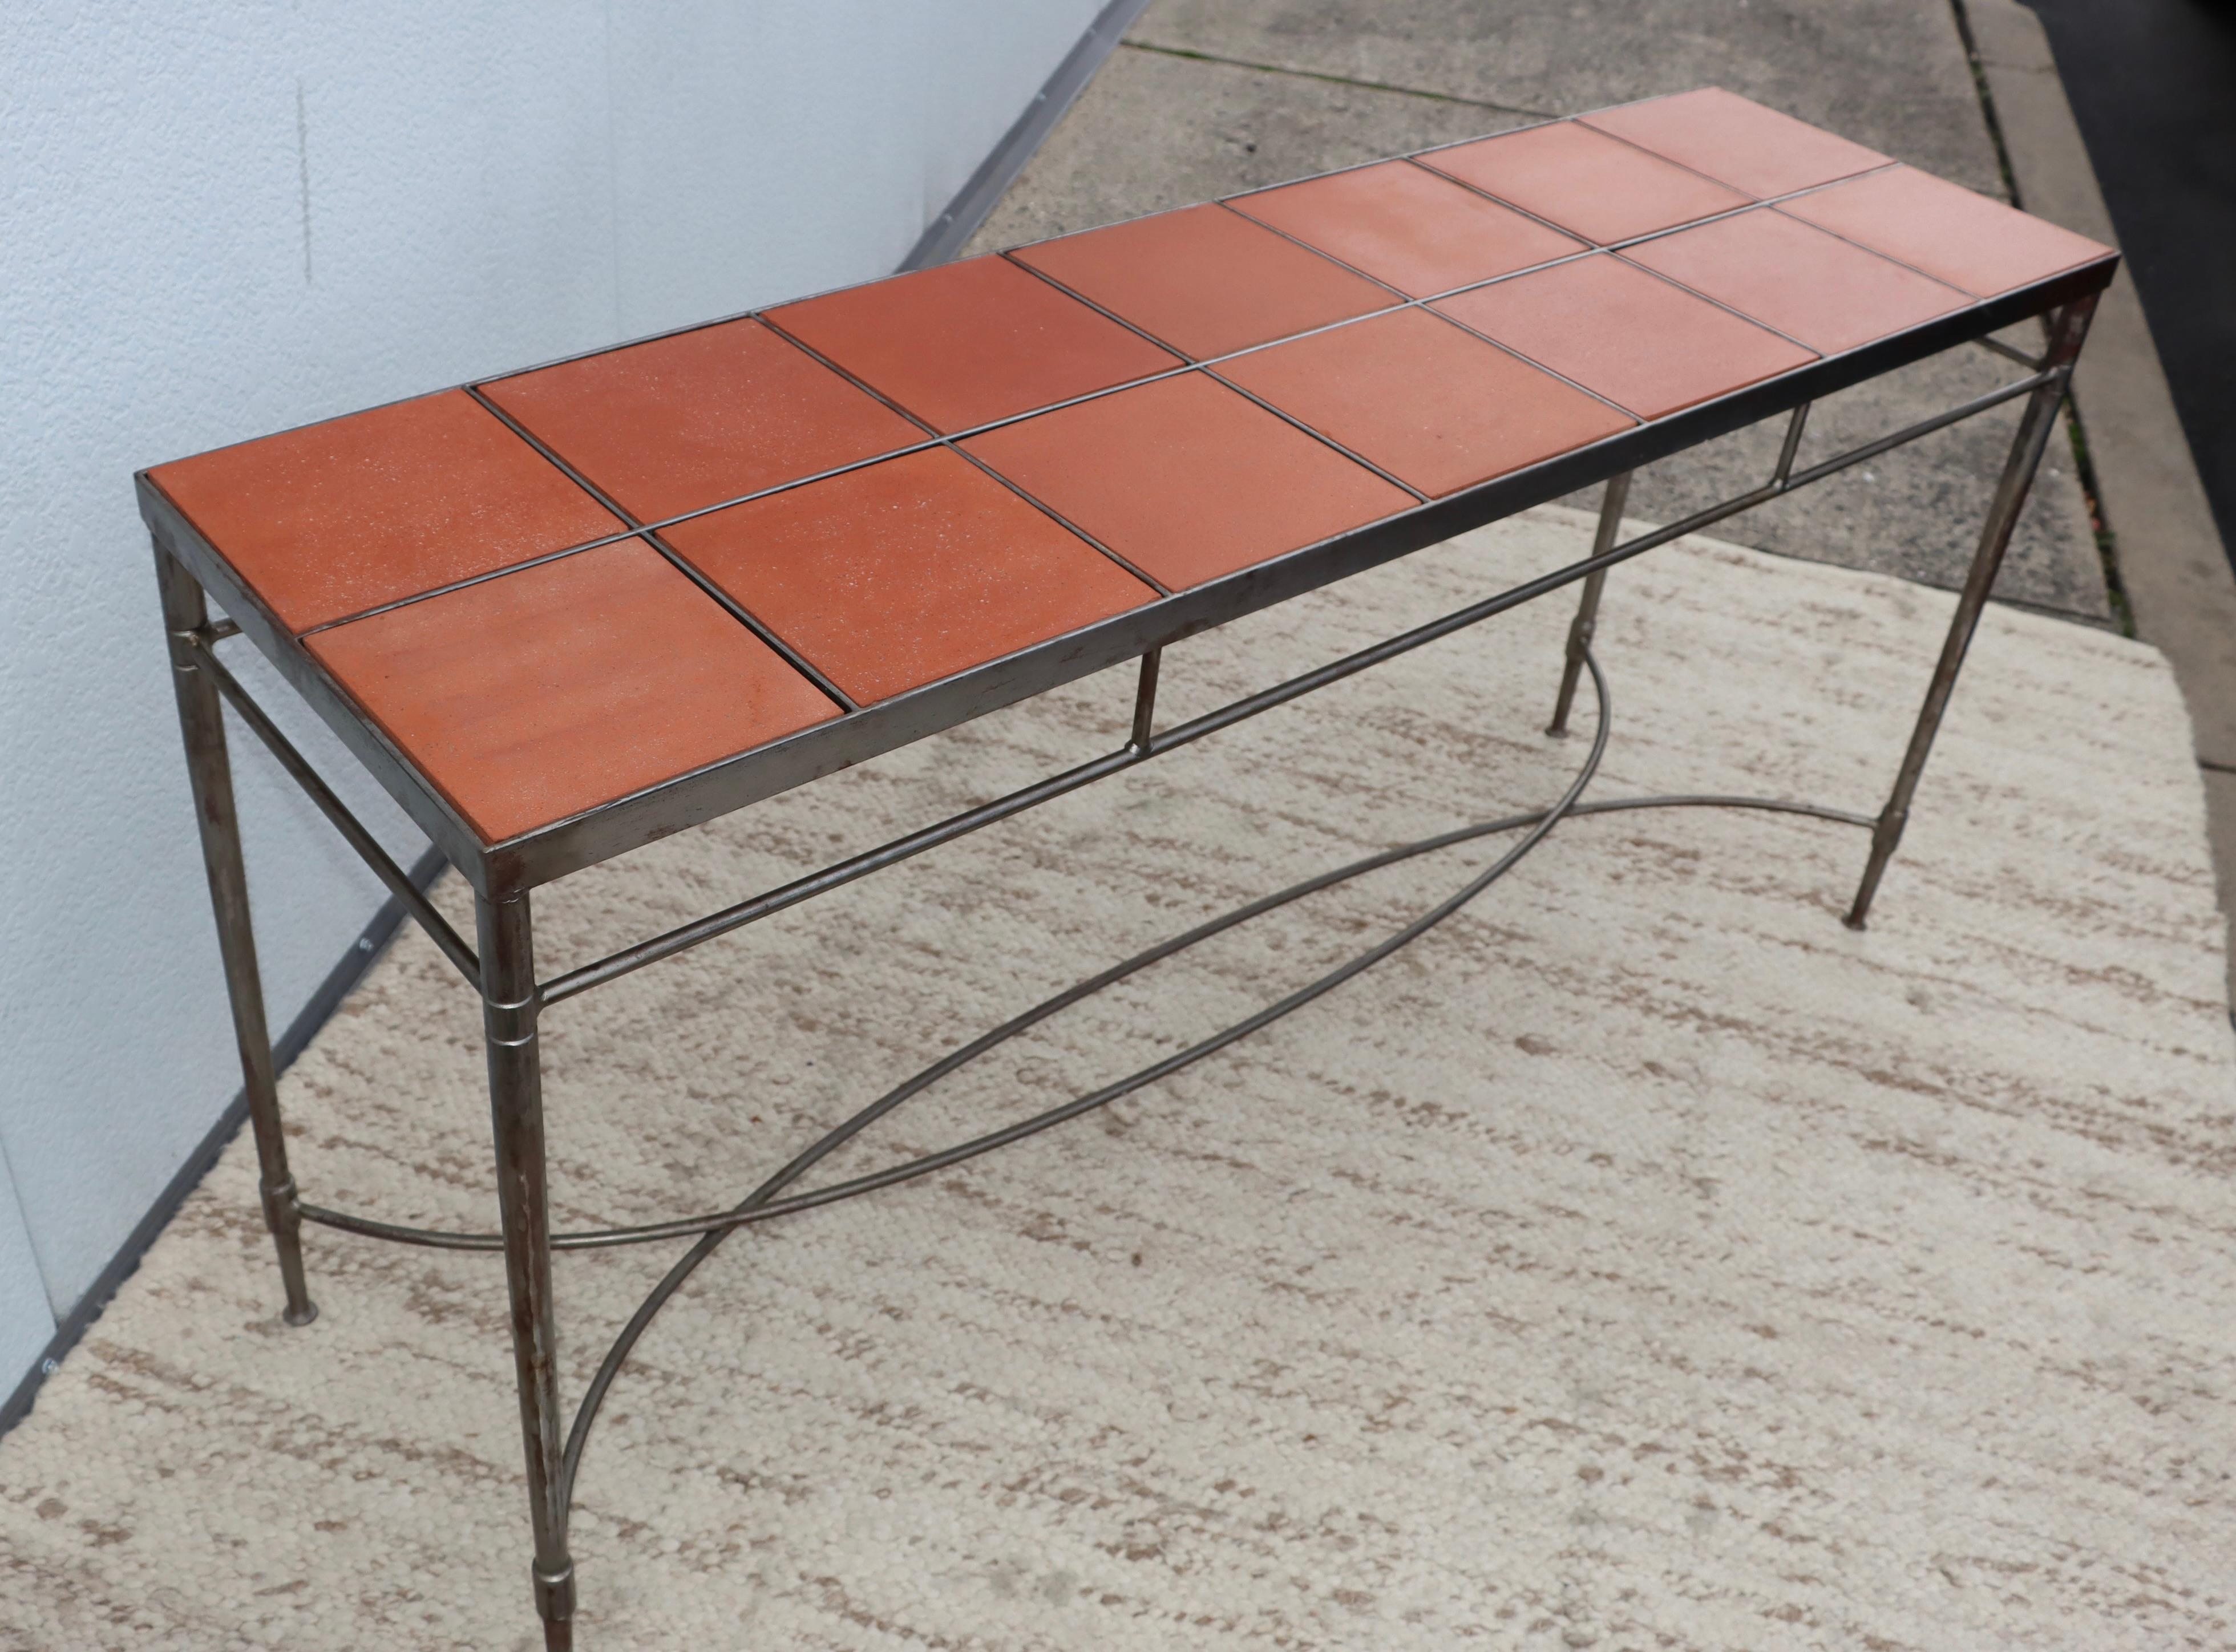 1970's Italian Iron Console Table with Impruneta Terracotta Tile Inserts For Sale 9